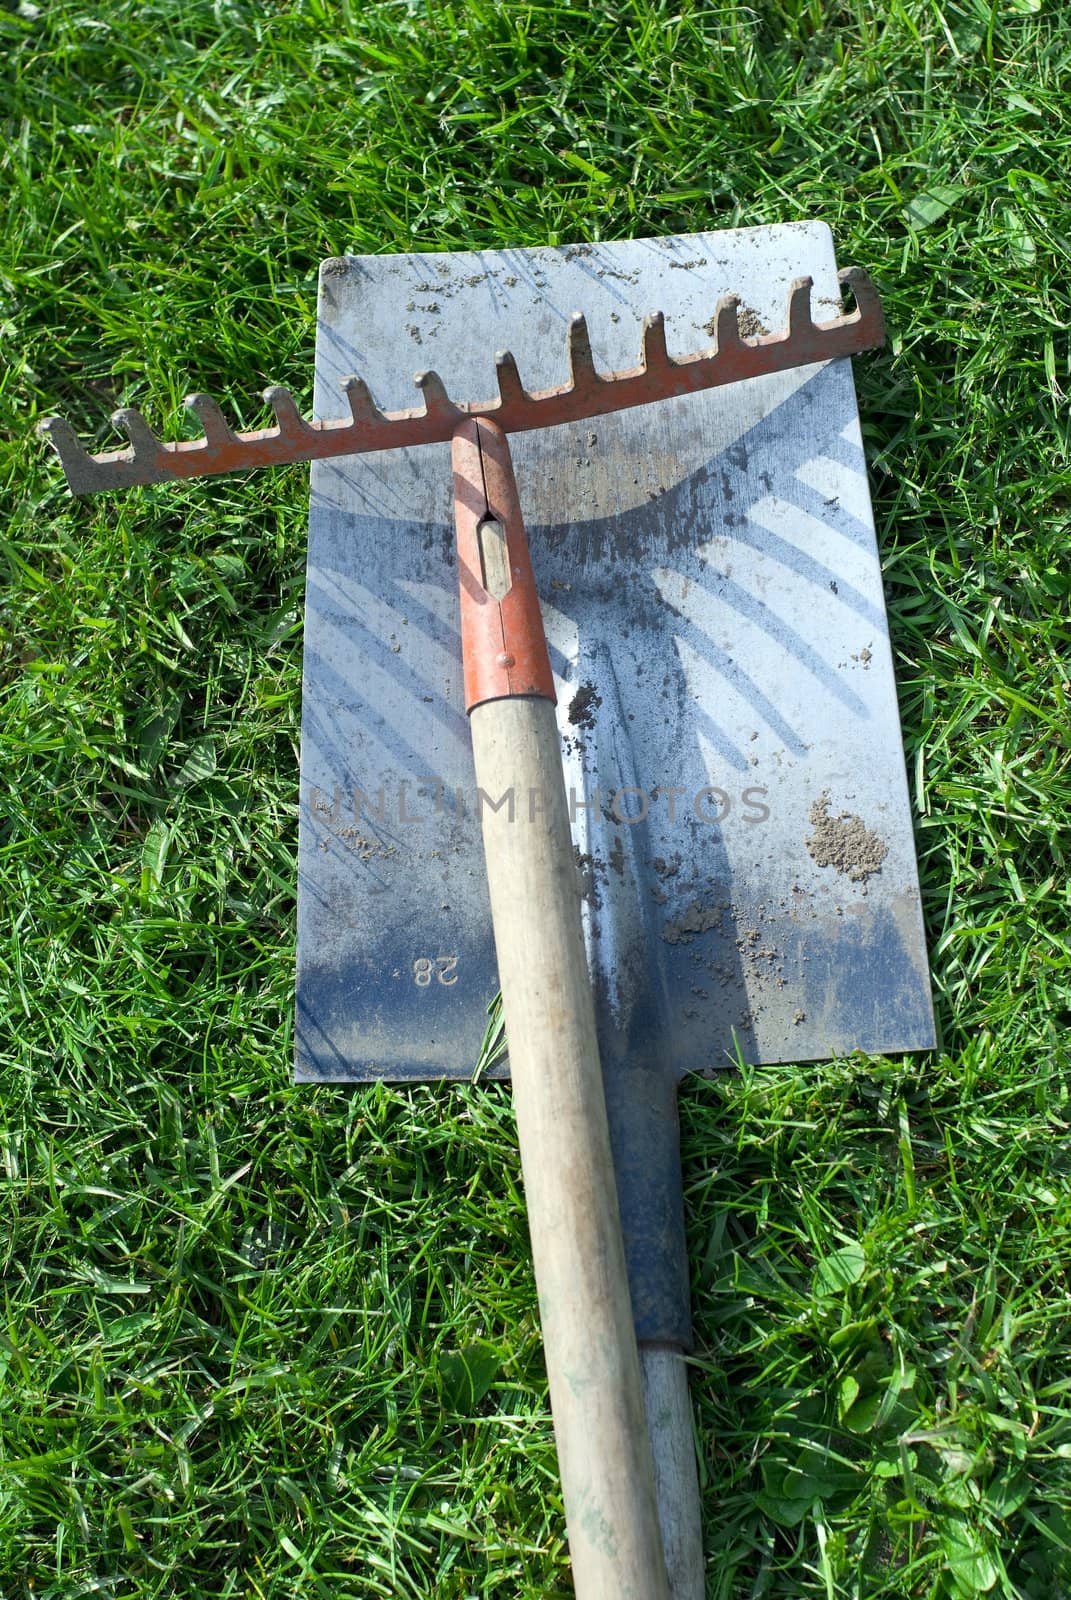 a shovel and a rake in the grass